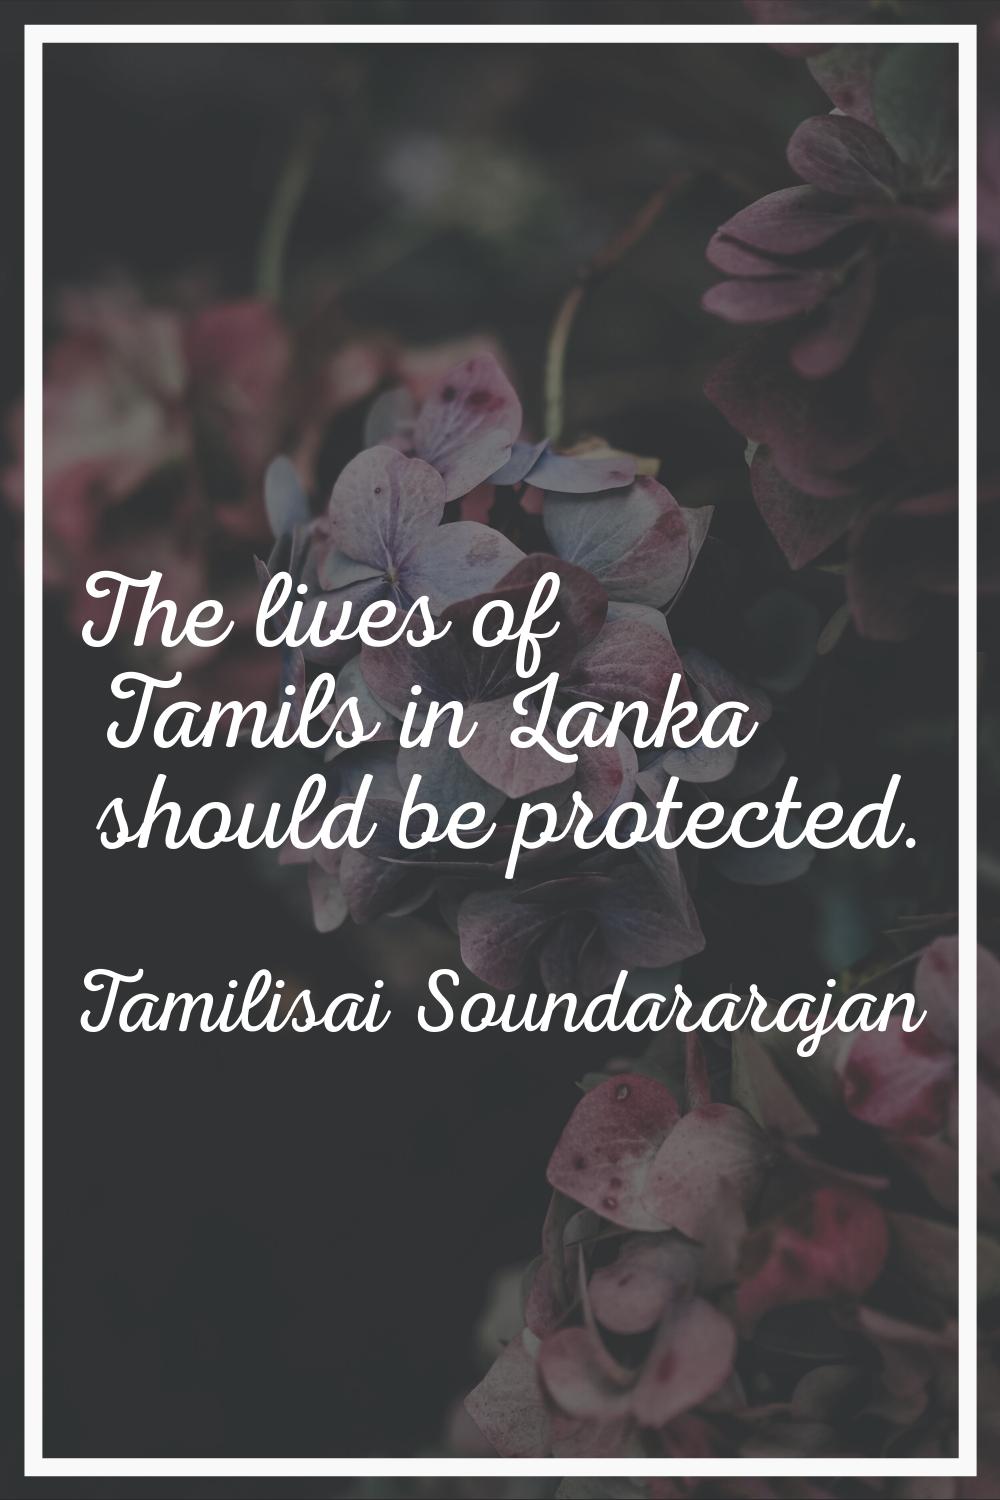 The lives of Tamils in Lanka should be protected.